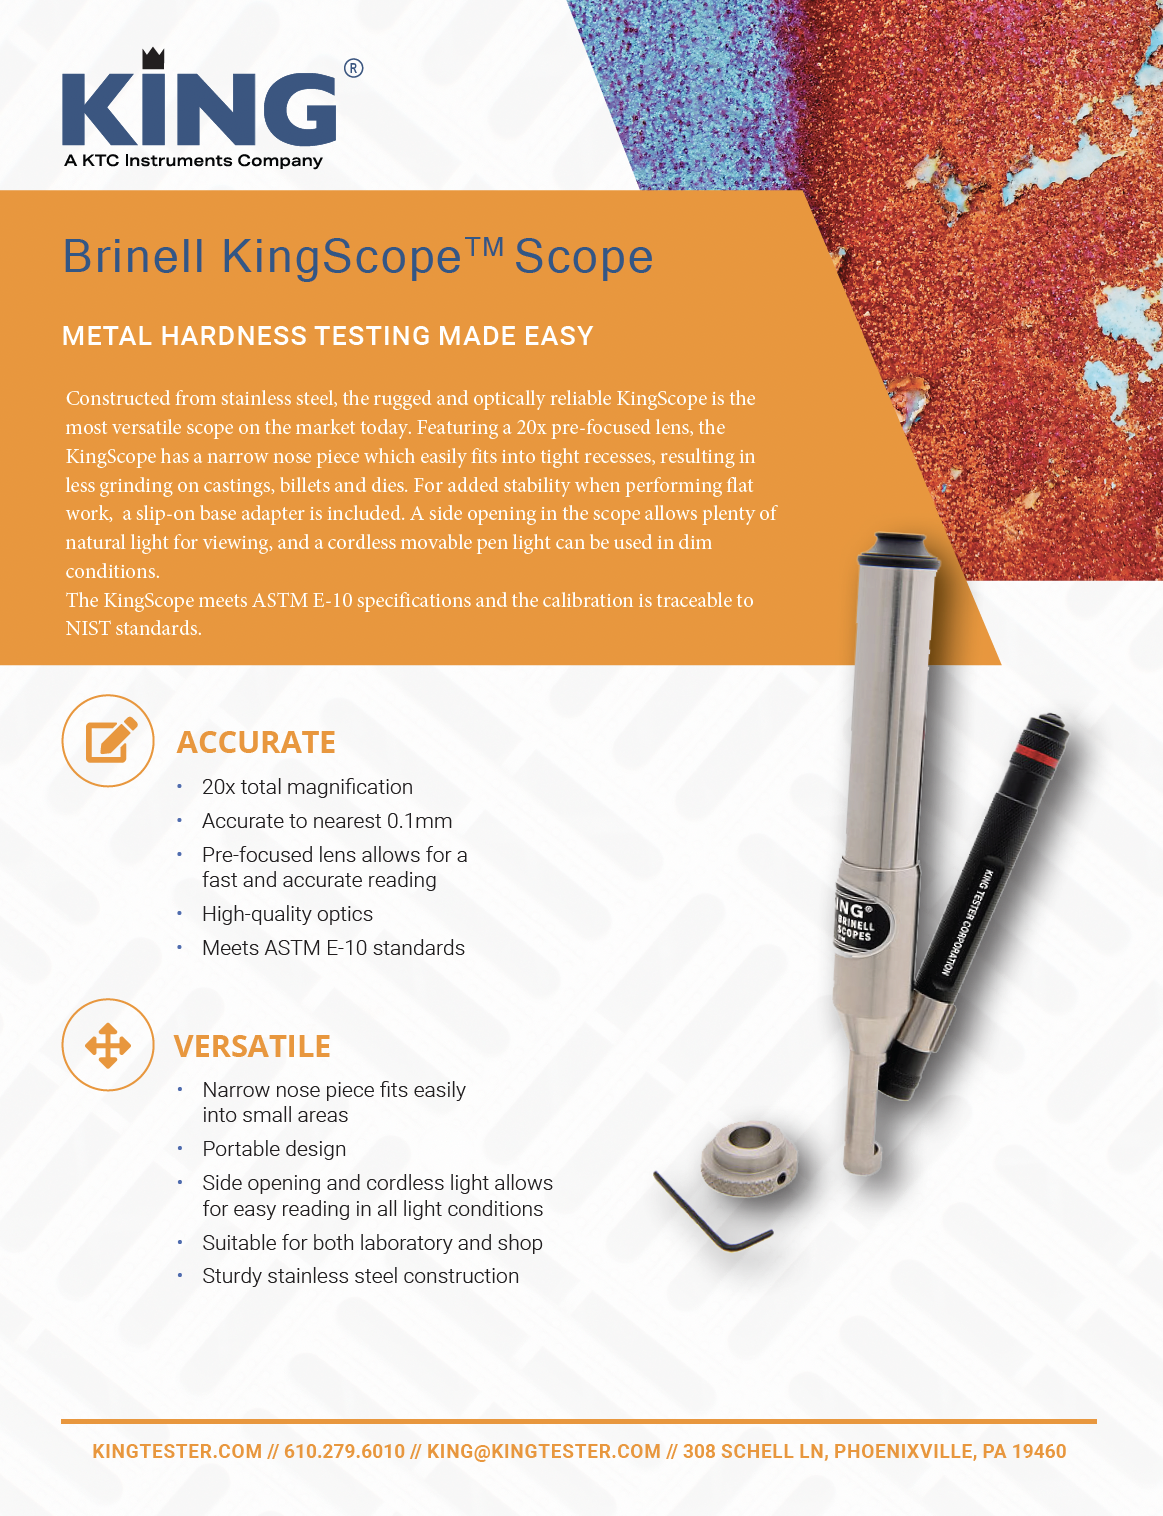 King Testers, King Scopes and Accessories for the King Testers